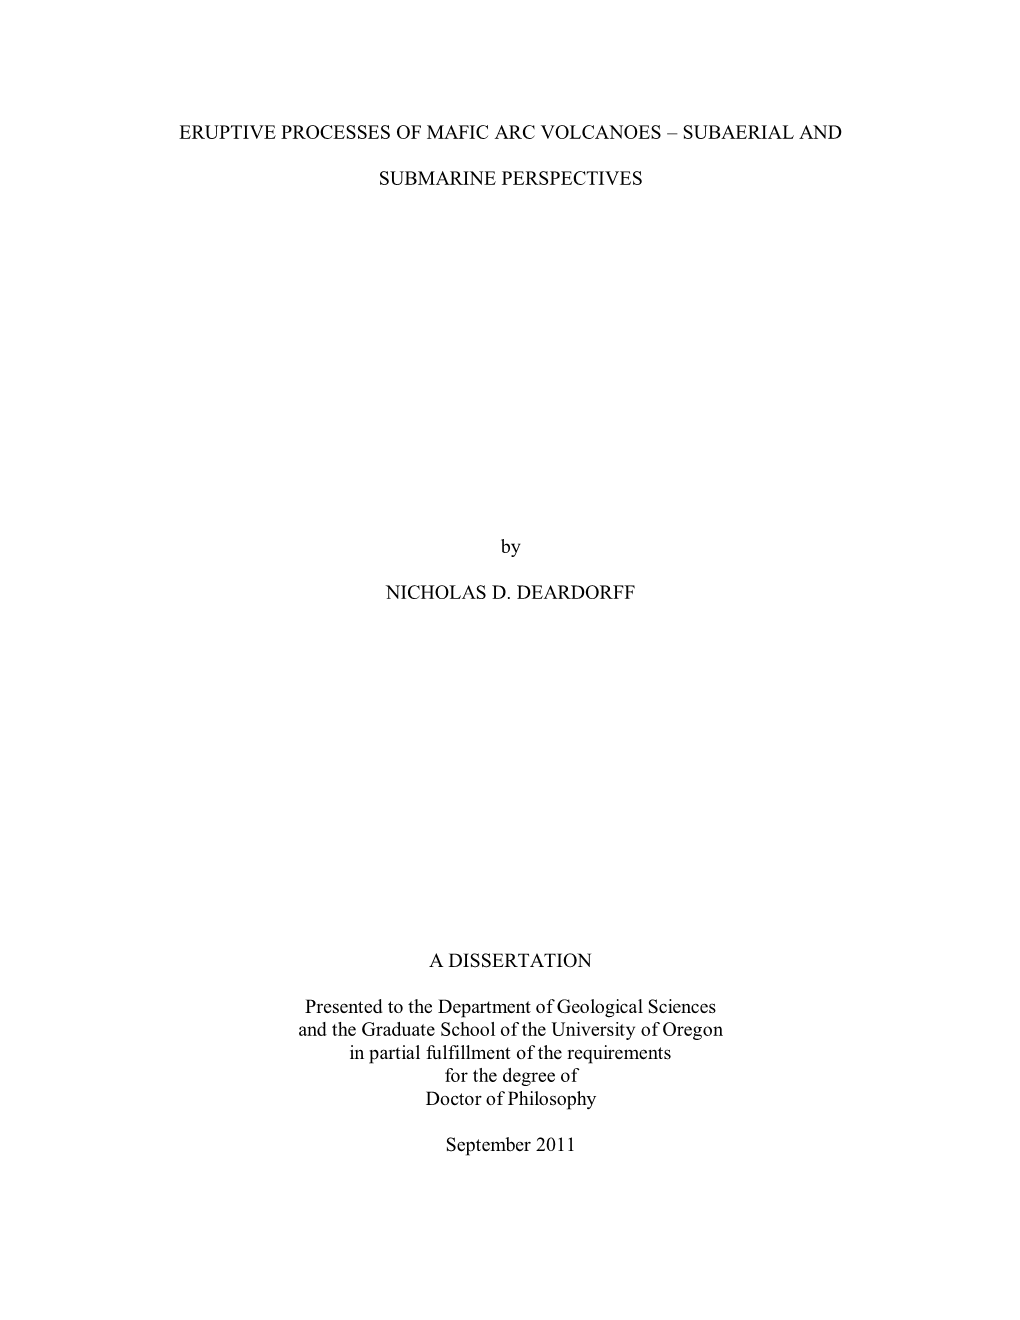 ERUPTIVE PROCESSES of MAFIC ARC VOLCANOES – SUBAERIAL and SUBMARINE PERSPECTIVES by NICHOLAS D. DEARDORFF a DISSERTATION Prese